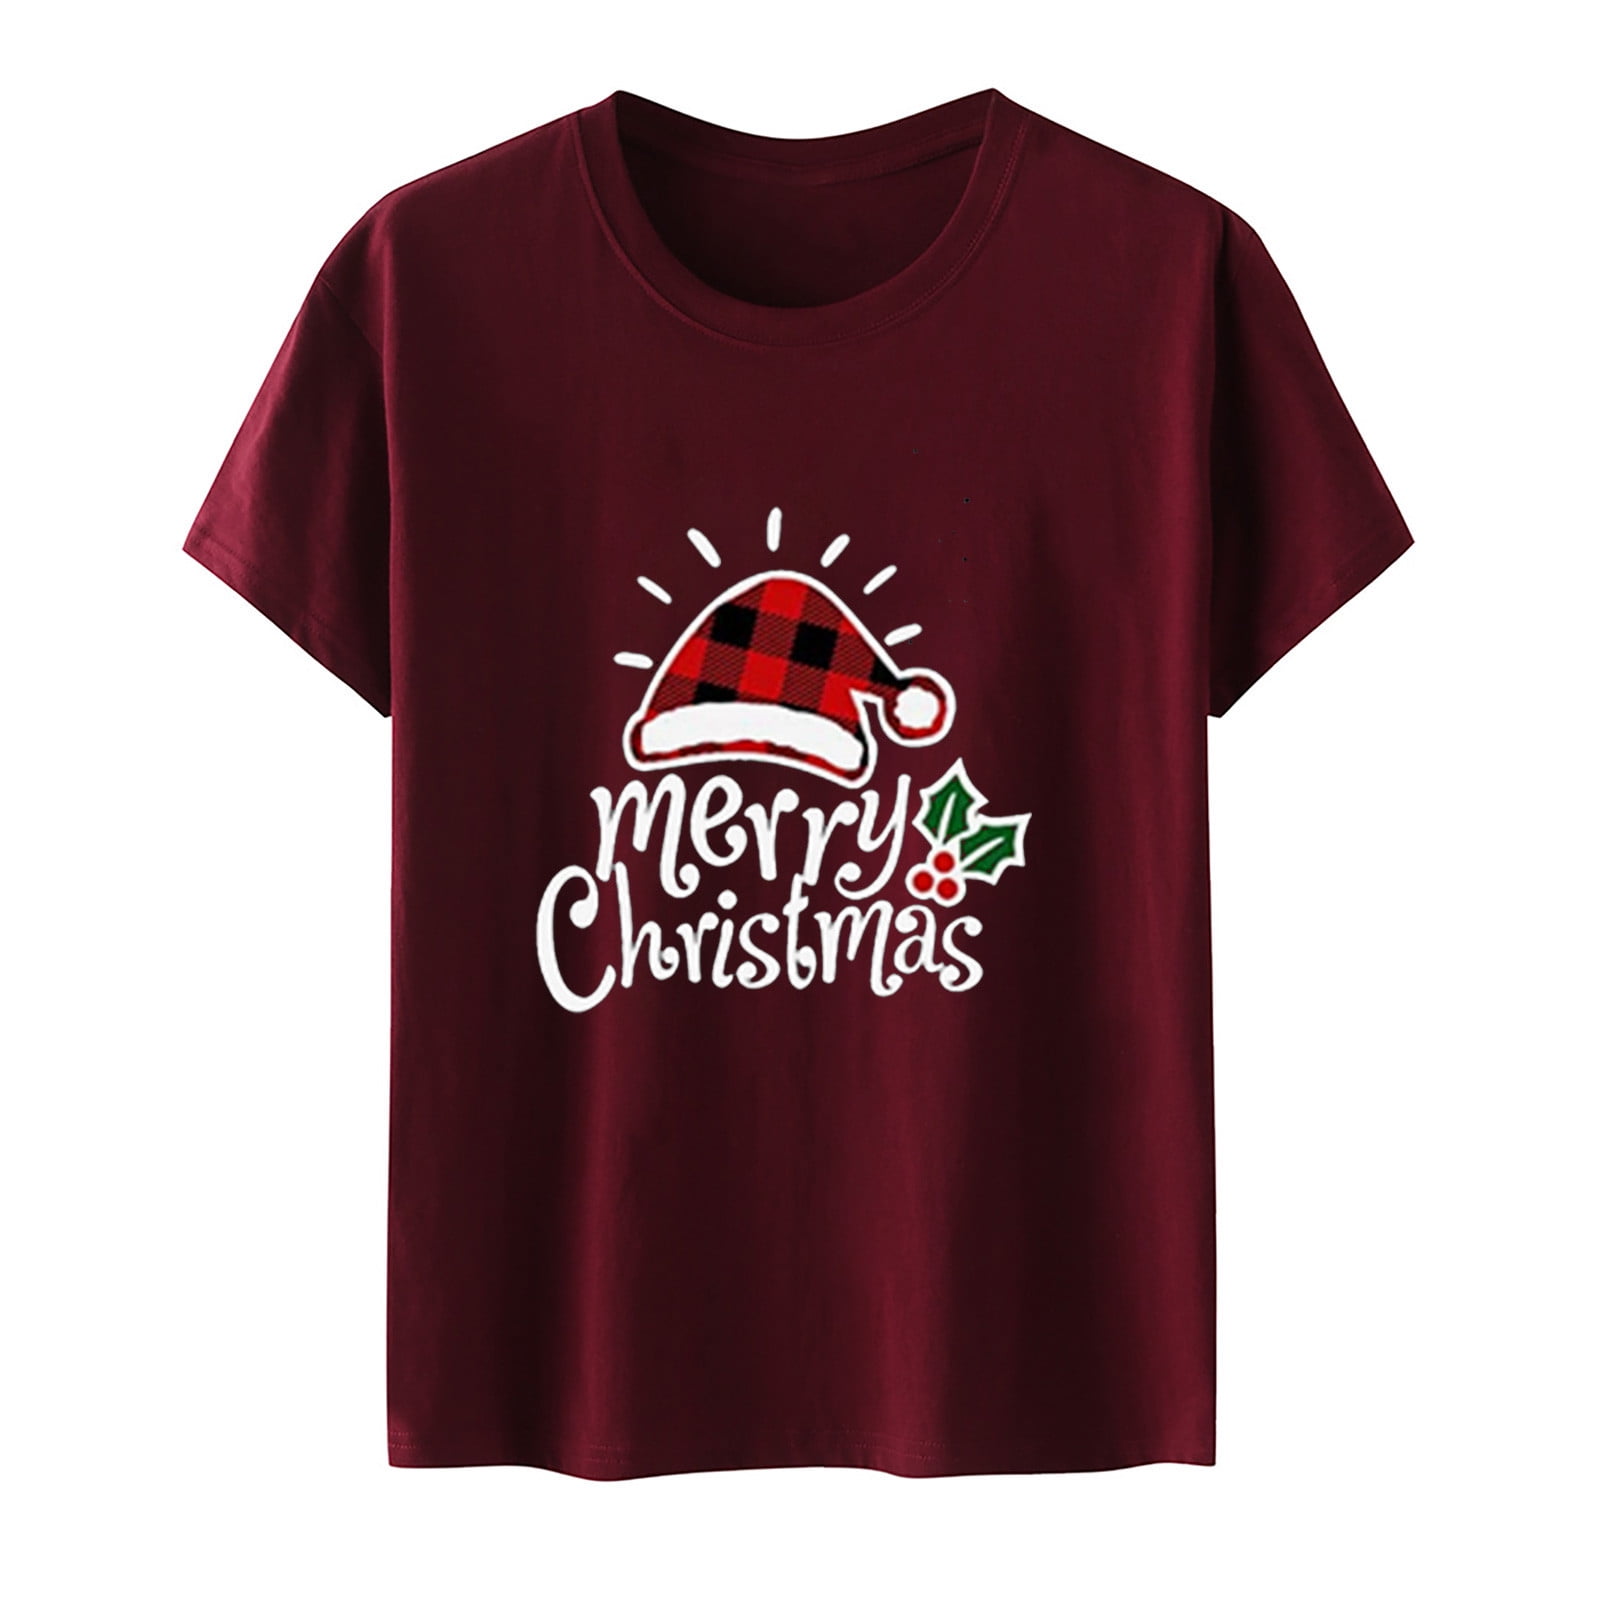 Merry Christmas Shirt Women Christmas Tree Red Wine Cup Graphic Tops ...